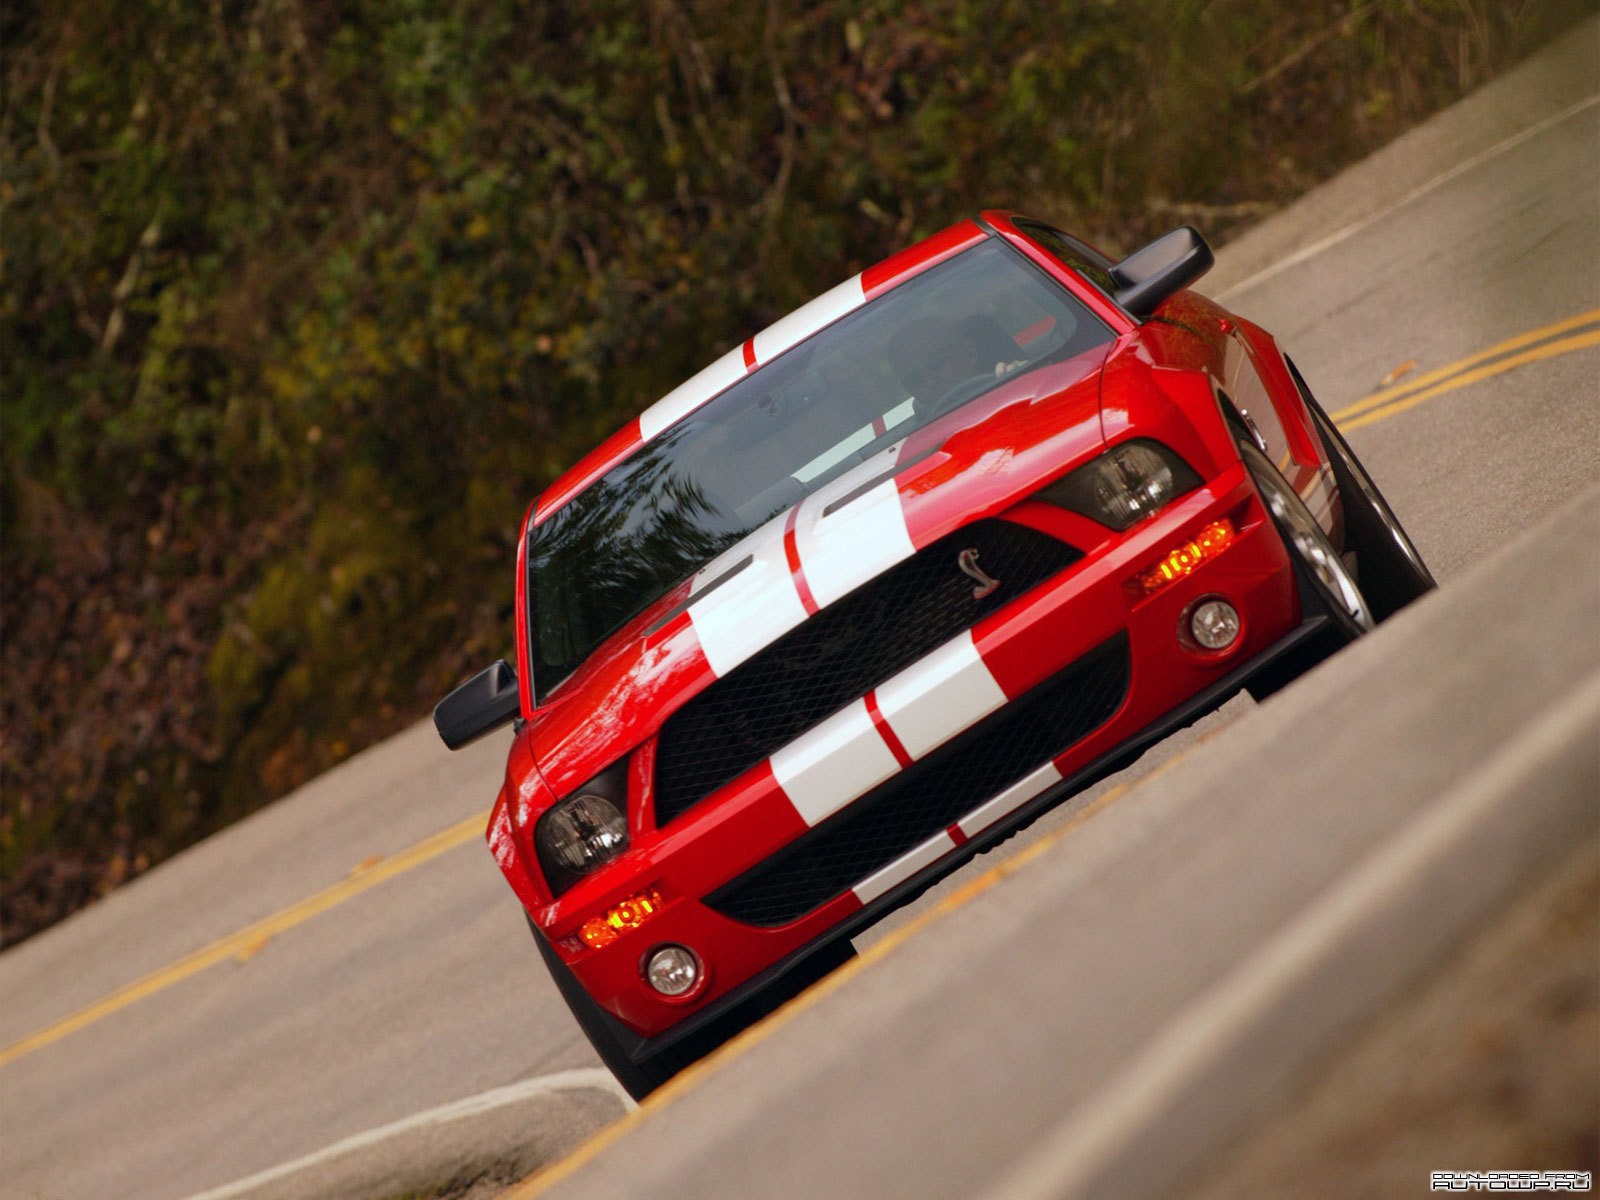 General 1600x1200 car vehicle Ford red cars Ford Mustang racing stripes muscle cars American cars